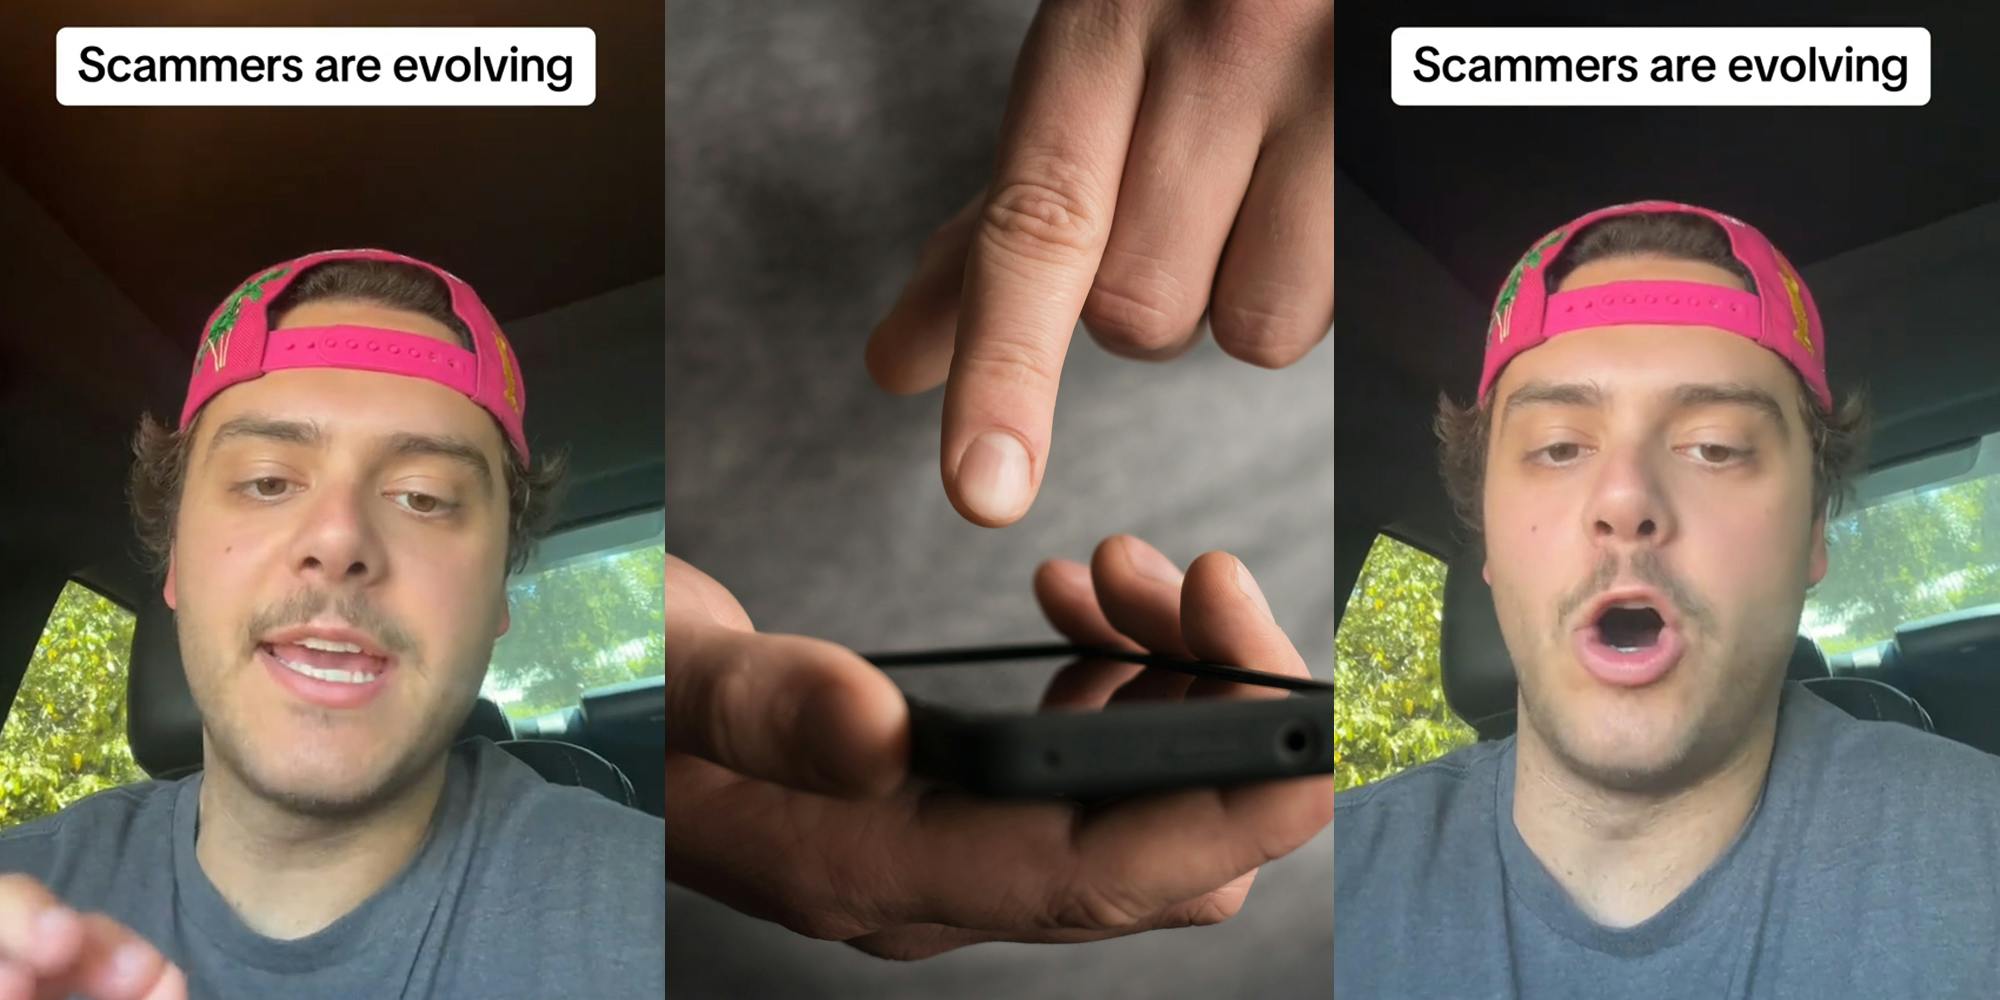 man speaking in car with caption "Scammers are evolving" (l) man holding phone about to press on call (c) man speaking in car with caption "Scammers are evolving" (r)